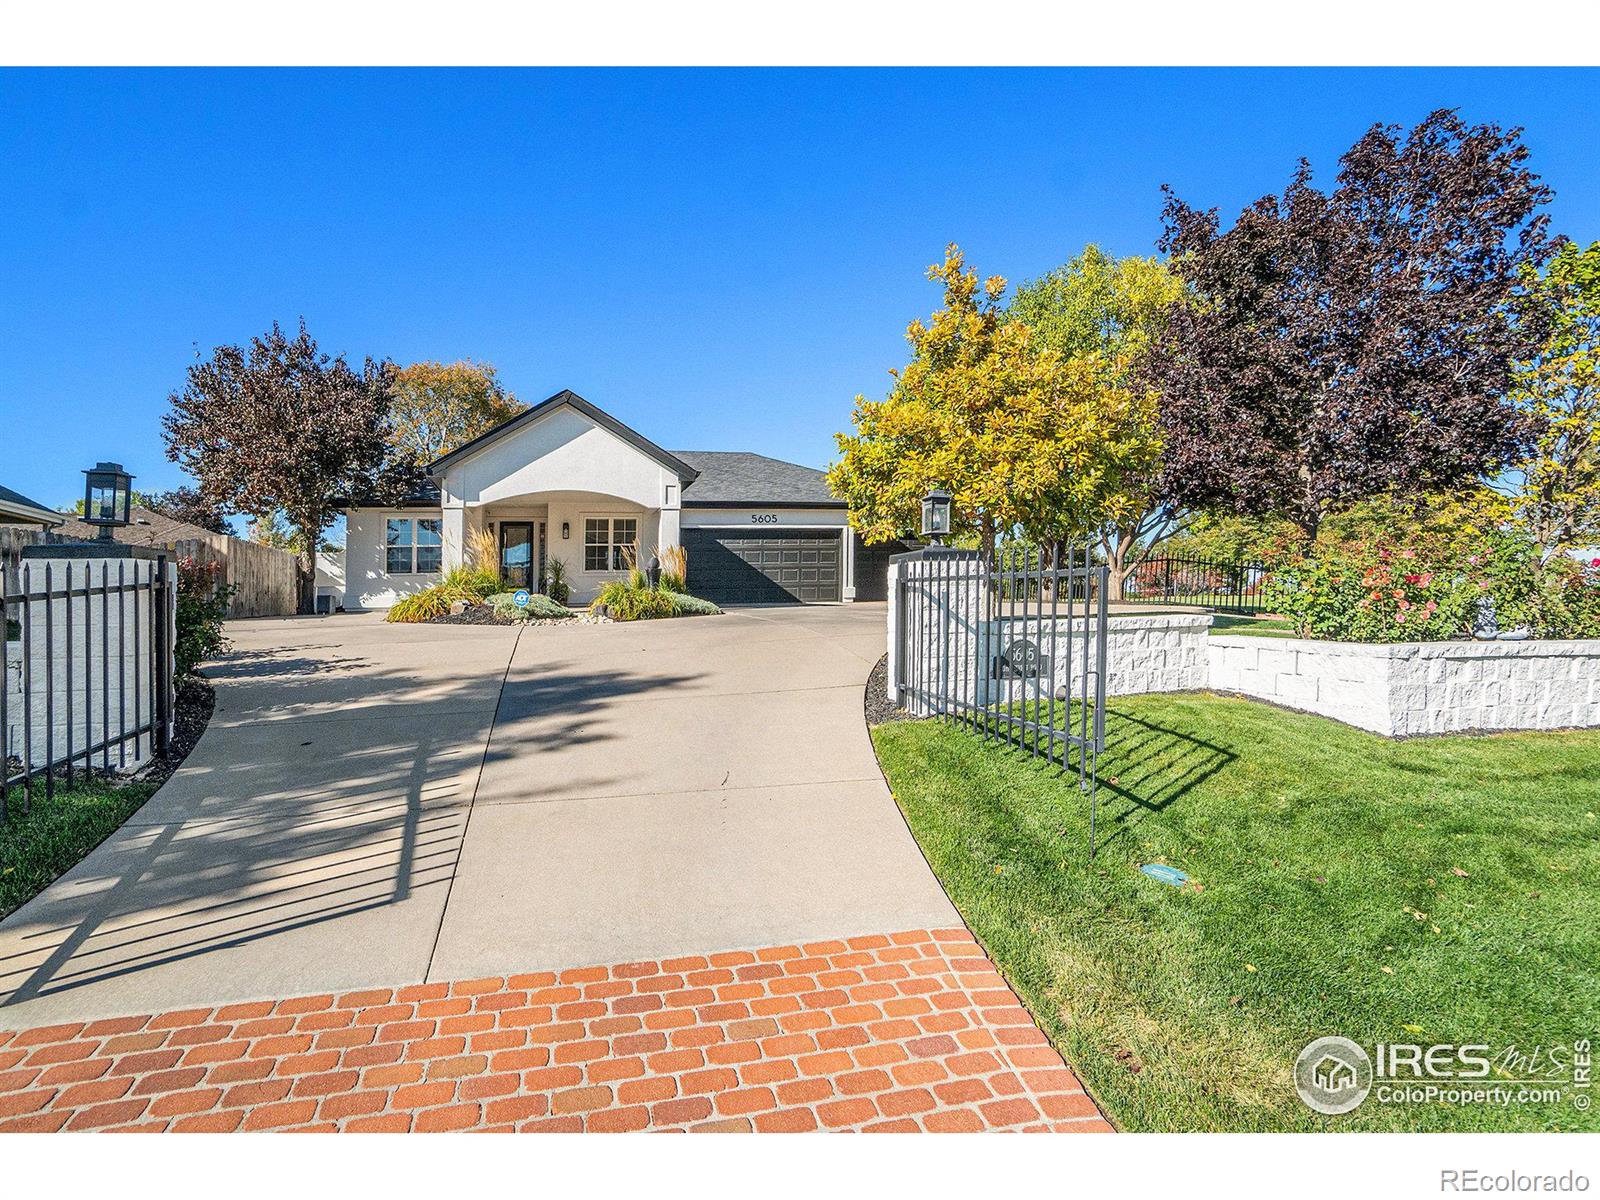 5605 W 13th St Rd, greeley MLS: 456789999522 Beds: 4 Baths: 4 Price: $595,000